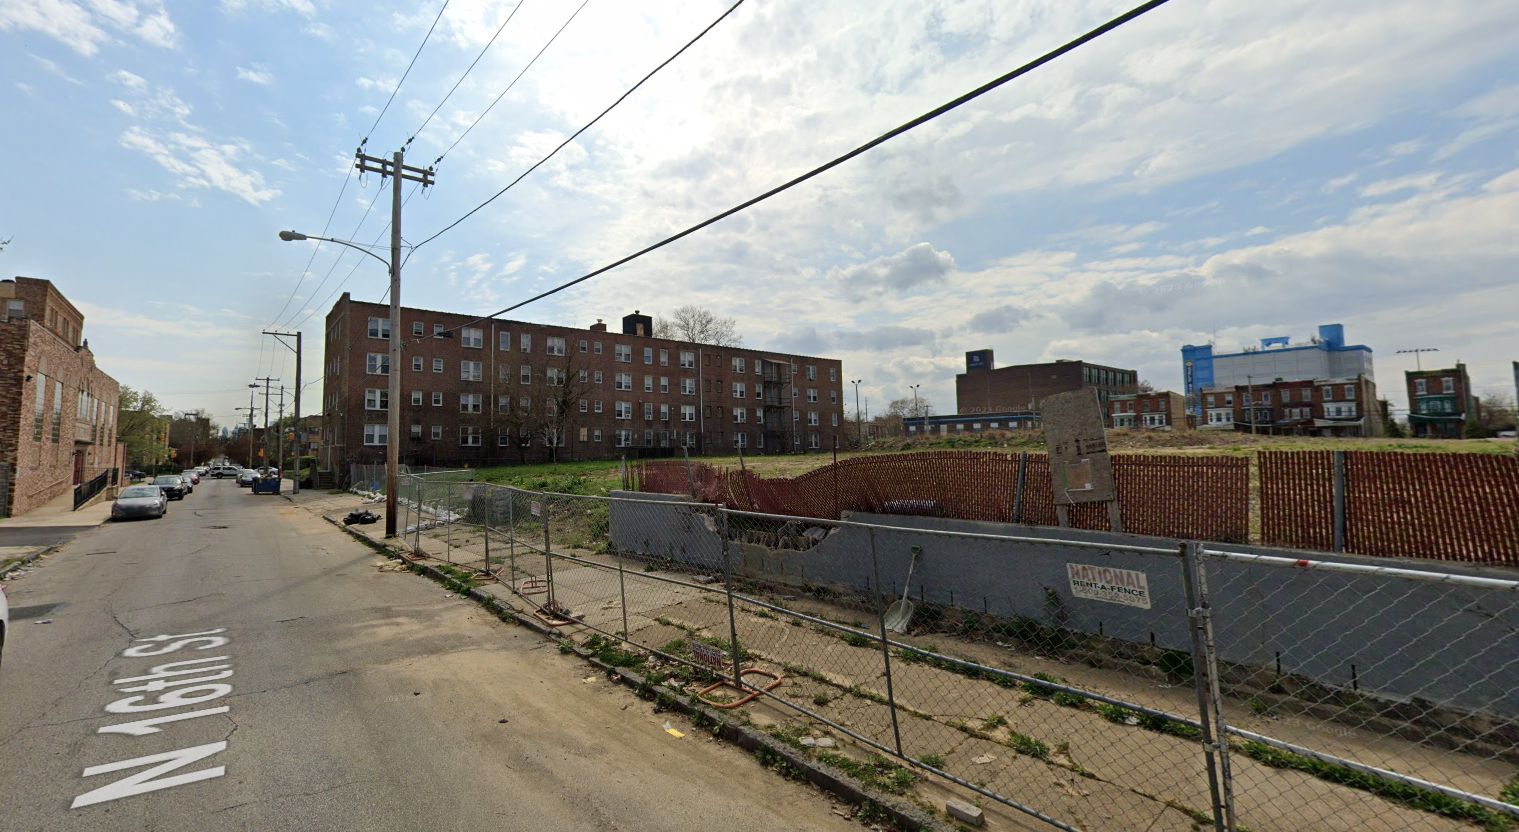 3216 North 16th Street prior to redevelopment. Looking southwest, with the Allegheny Apartments in the background. April 2023. Credit: Google Maps